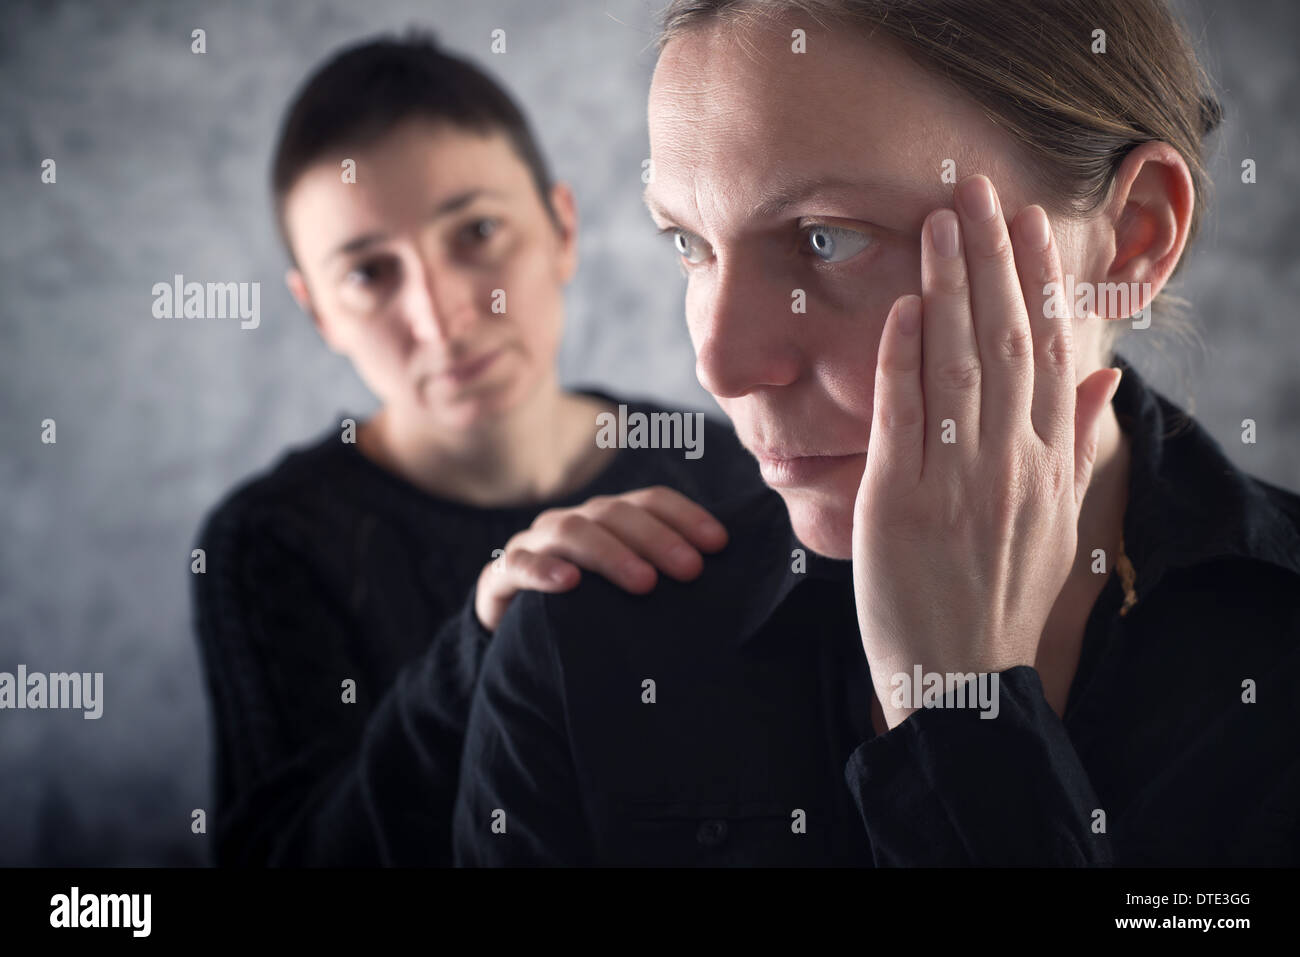 Comforting friend. Woman consoling her sad friend with hand on shoulder. Stock Photo